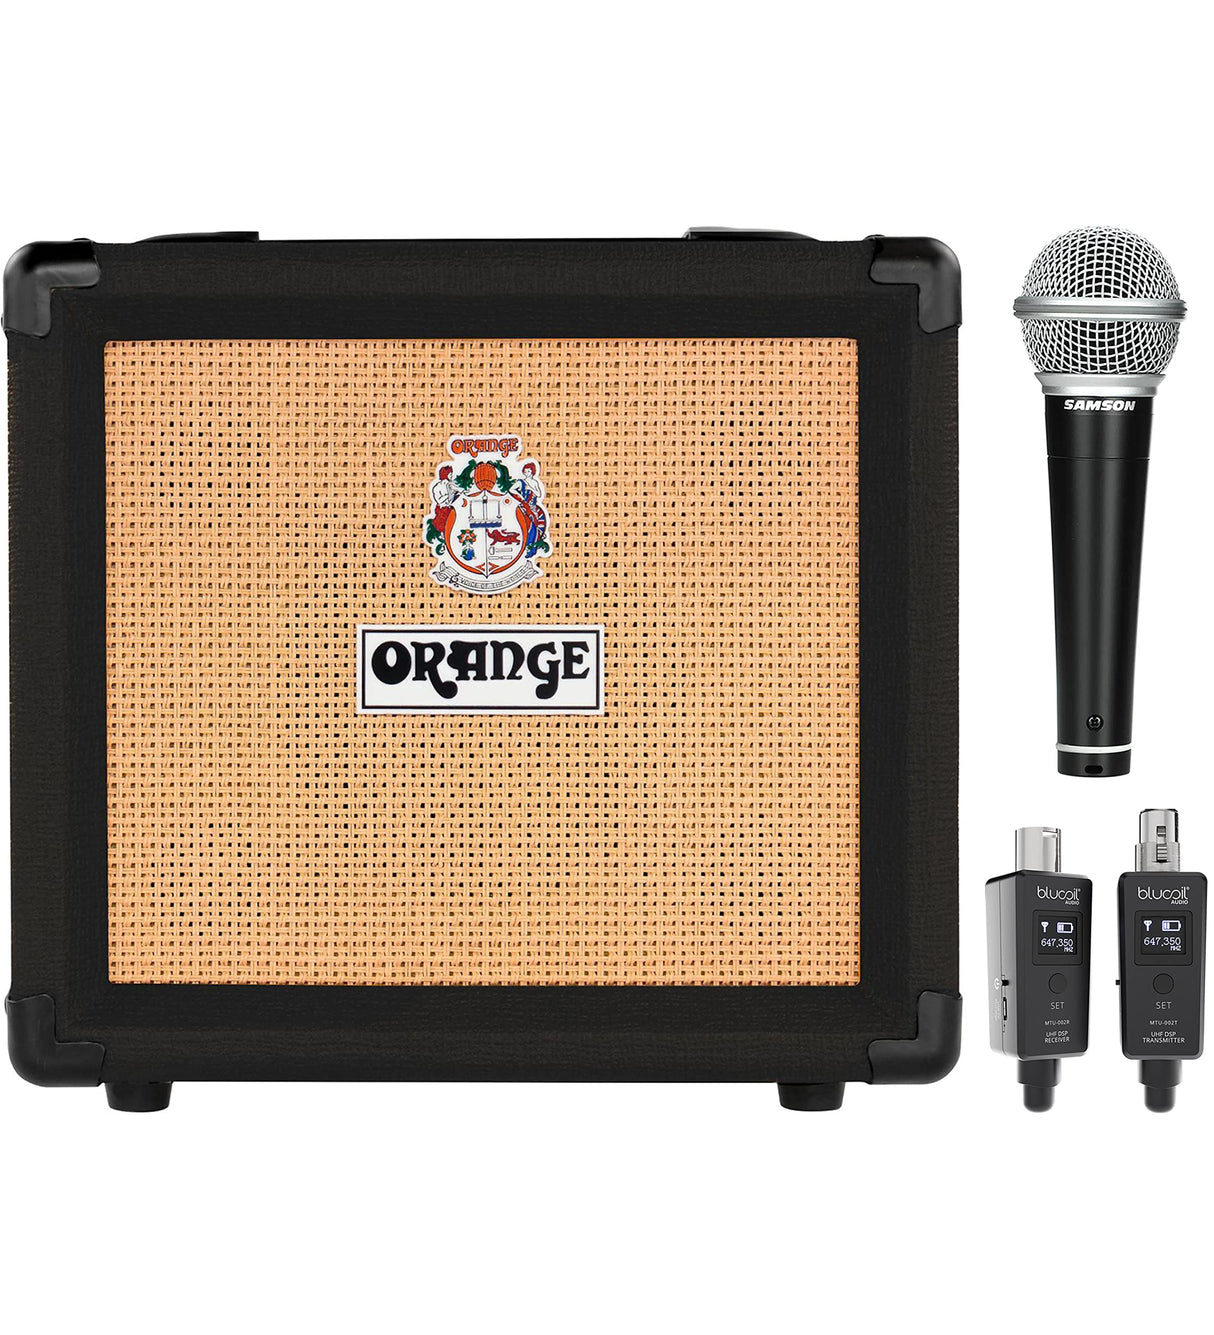 Orange Amplifiers Crush12 12W 1x6 Guitar Combo Amp (Black) Bundle with Blucoil Wireless Mic System, and Samson R21S Dynamic Microphone